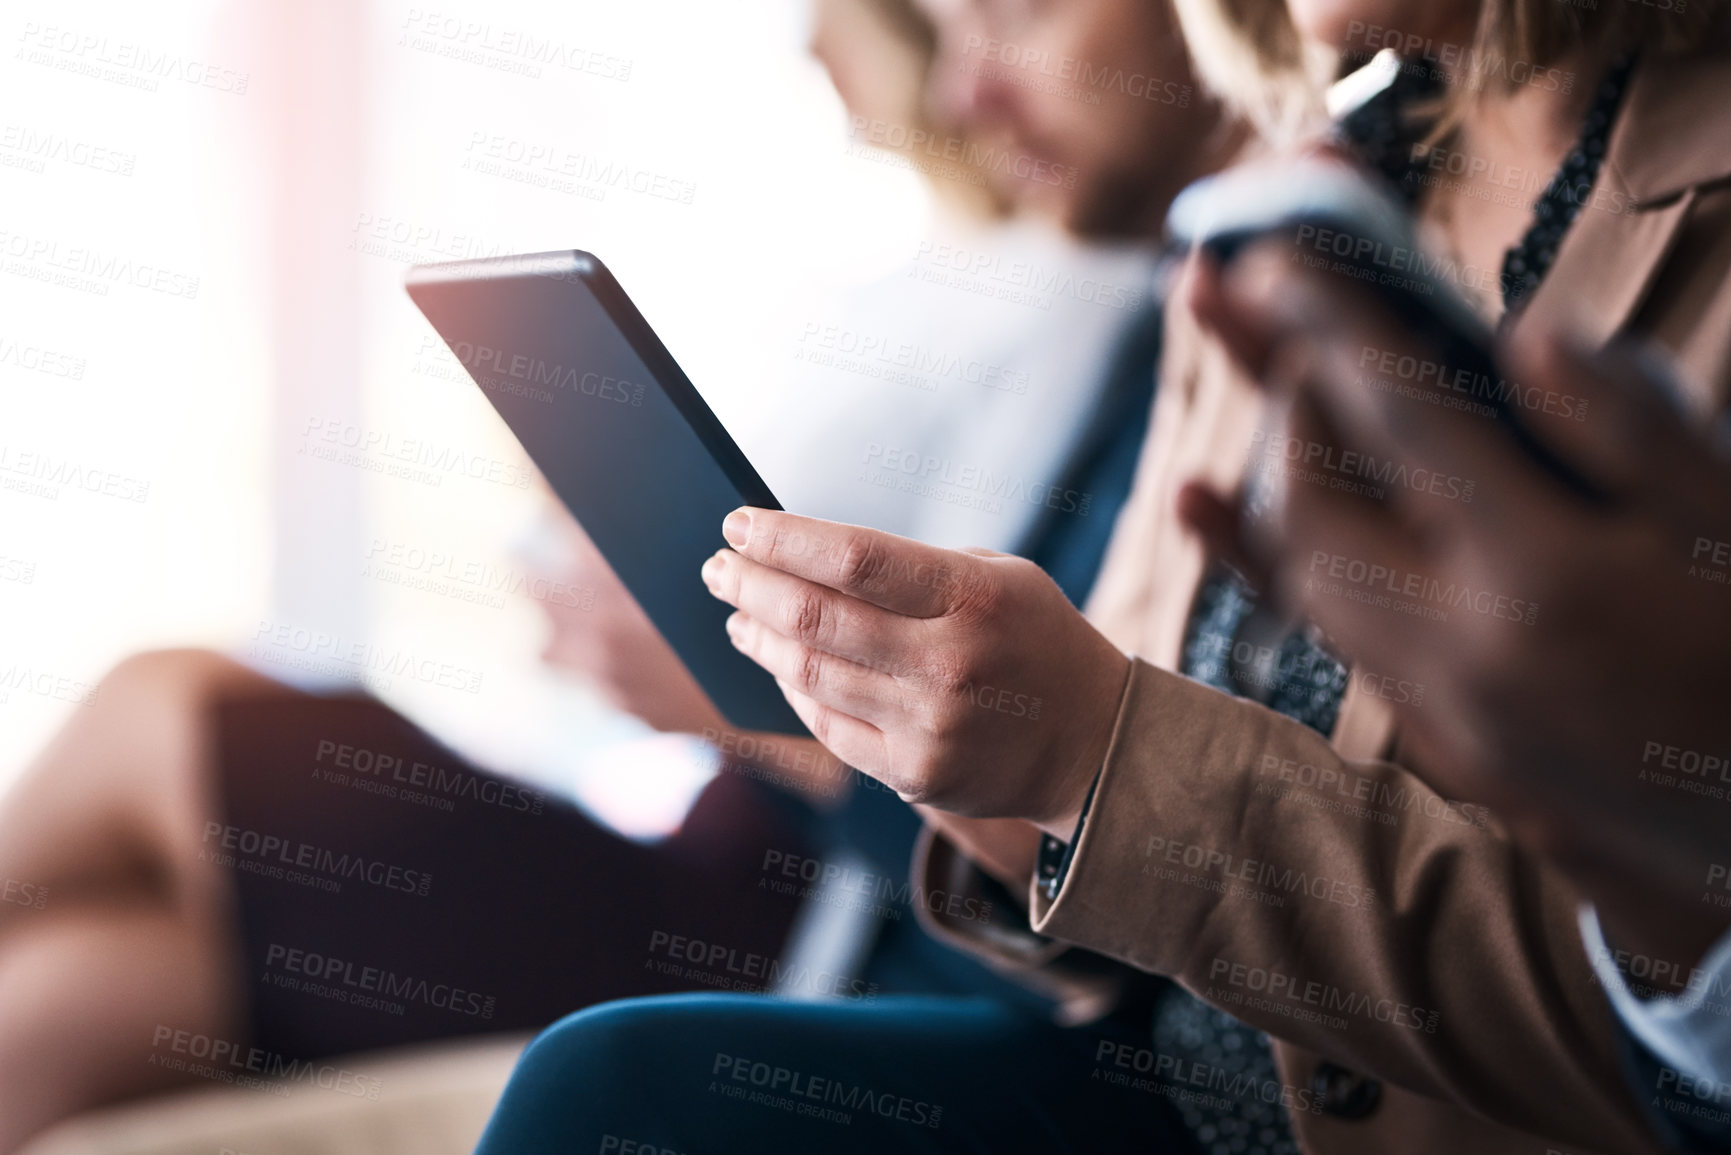 Buy stock photo Cropped shot of an unrecognizable young businesswoman using her digital tablet while sitting in a meeting